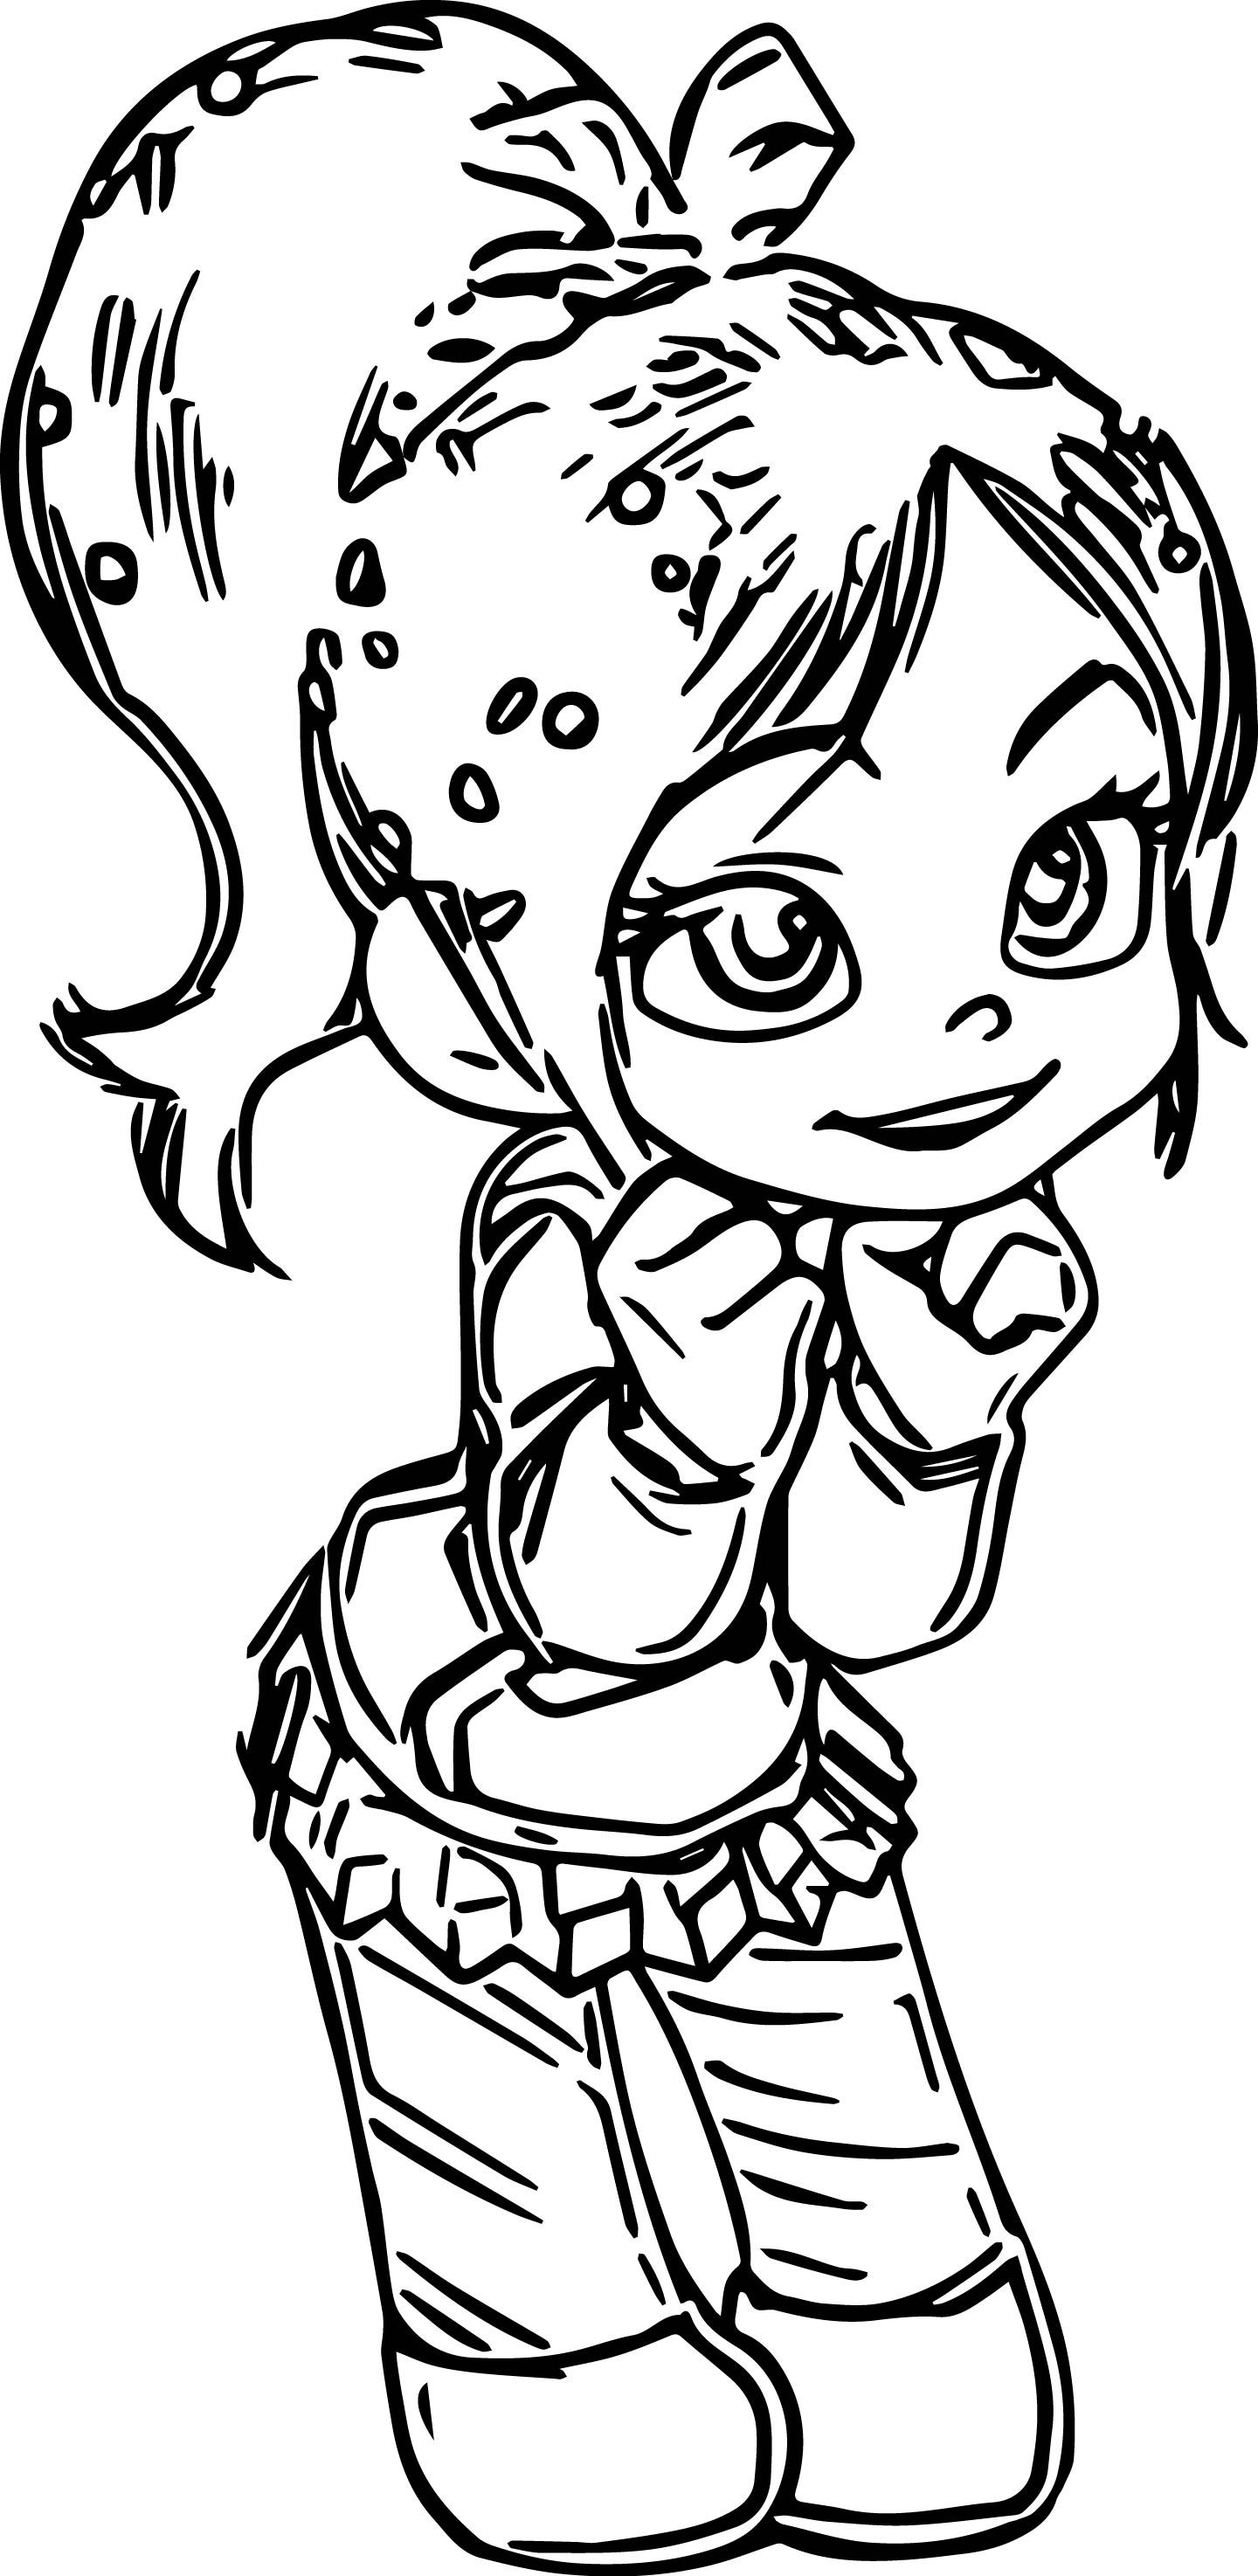 Vanellope von Schweetz Girl Coloring Page | Princess coloring pages,  Butterfly coloring page, Coloring pages for girls